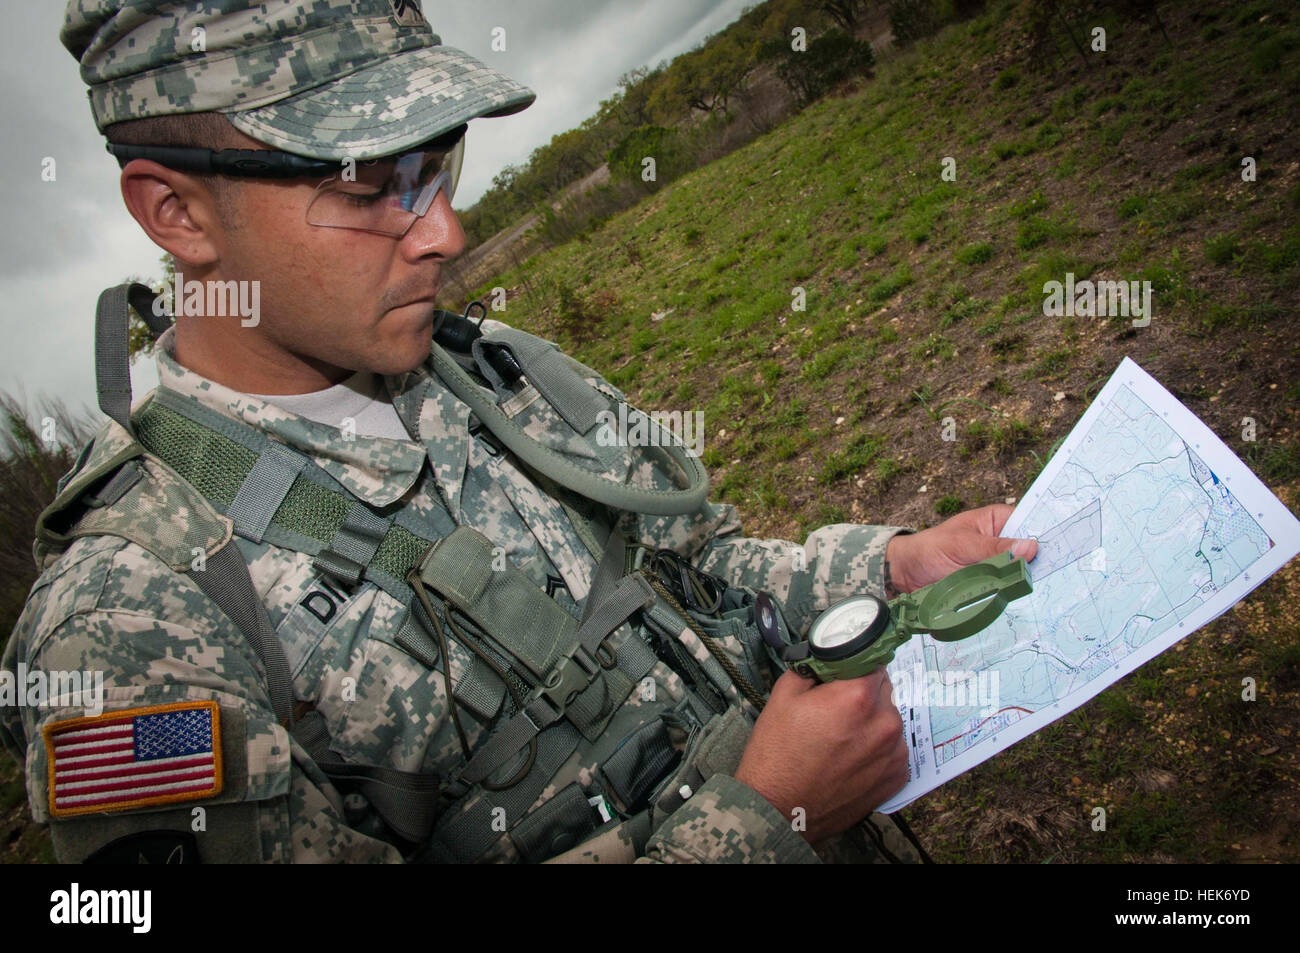 Cpl. John Diaz, 410th Civil Affairs Battalion, checks his map during the land navigation portion of the 350th Civil Affairs Command Best Warrior Competition at Camp Bullis, Texas on March 24, 2012. Diaz is from El Paso, Texas and is a civil affairs team sergeant with the 410th, which is also based in El Paso. (U.S. Army photo by Staff Sgt. Felix R. Fimbres) 350th CACOM battles it out by the Alamo 120325-A-CK868-283 Stock Photo